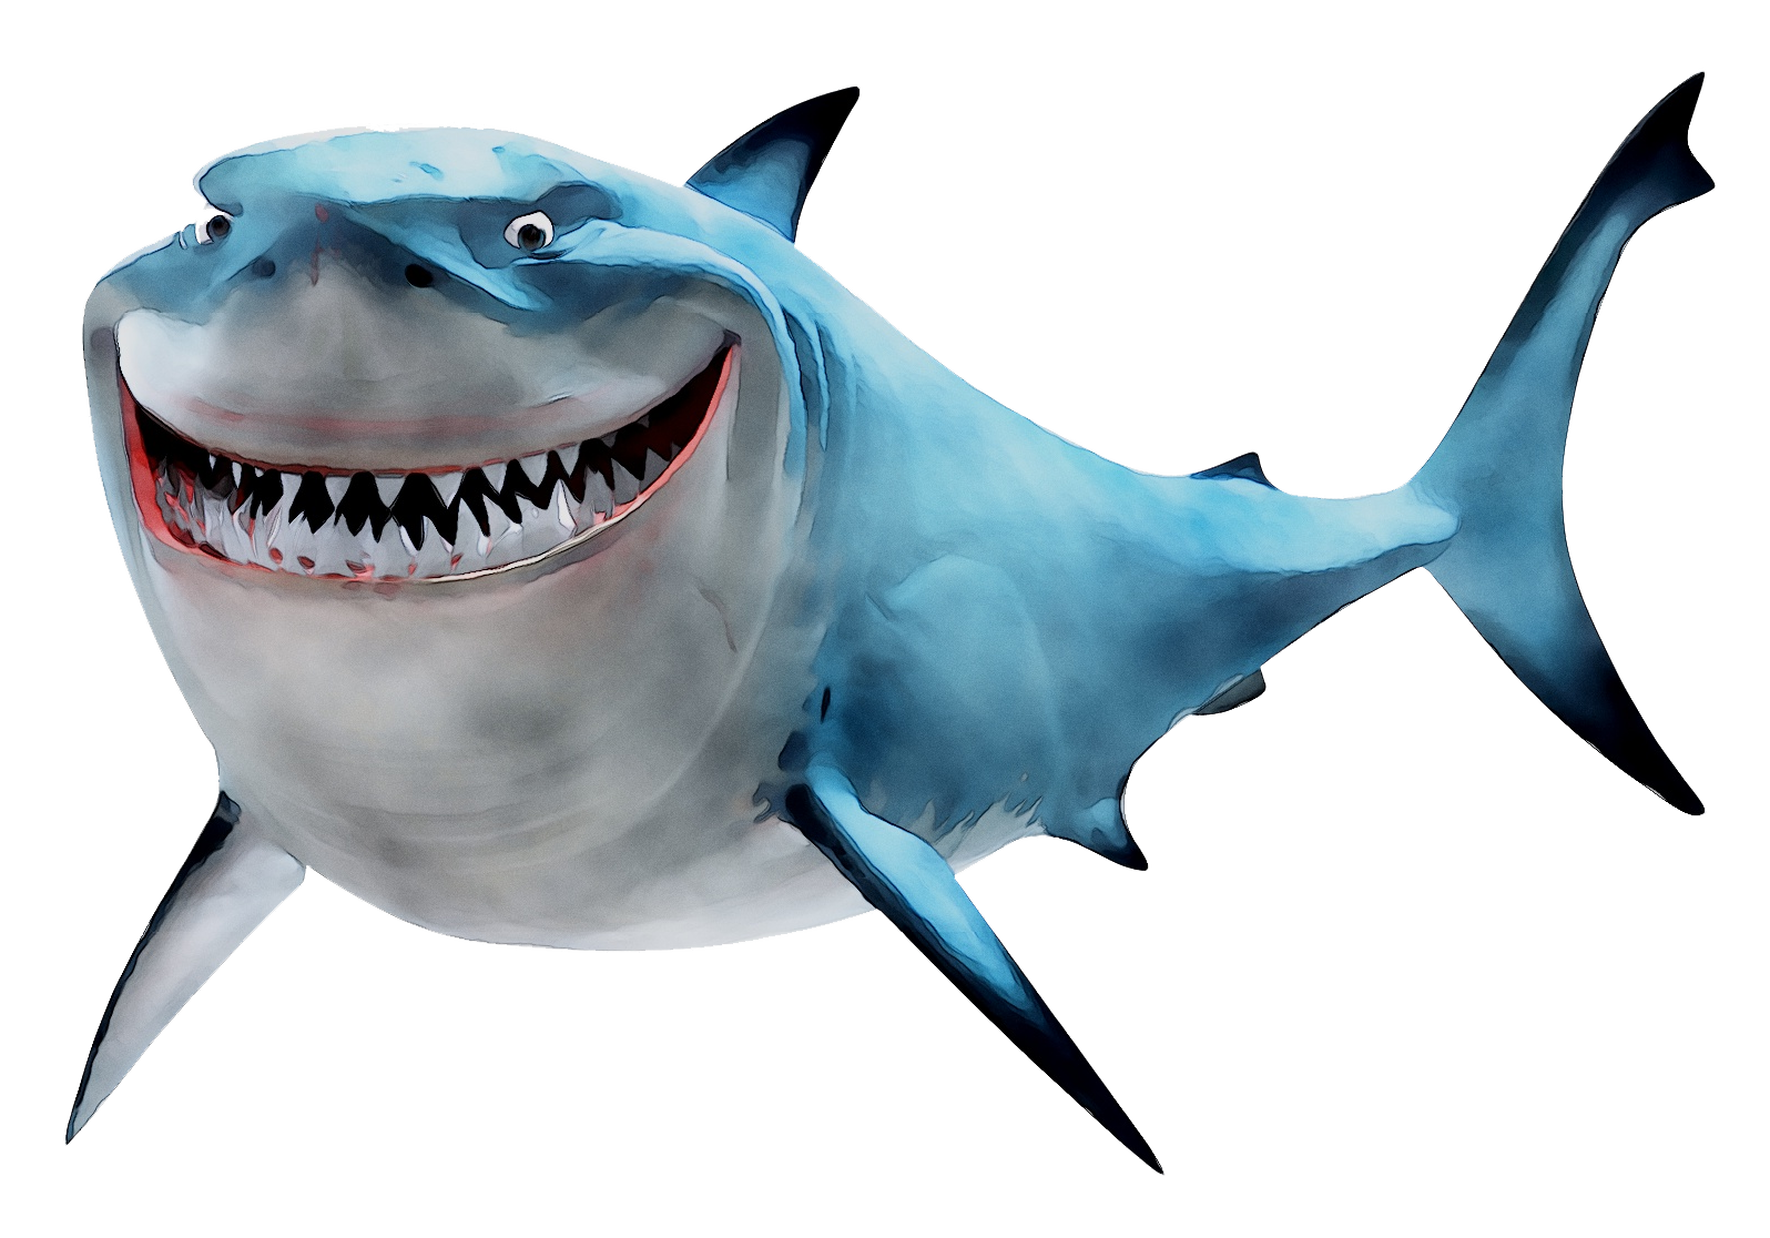 Bruce Great white shark Portable Network Graphics Finding Nemo - png ...